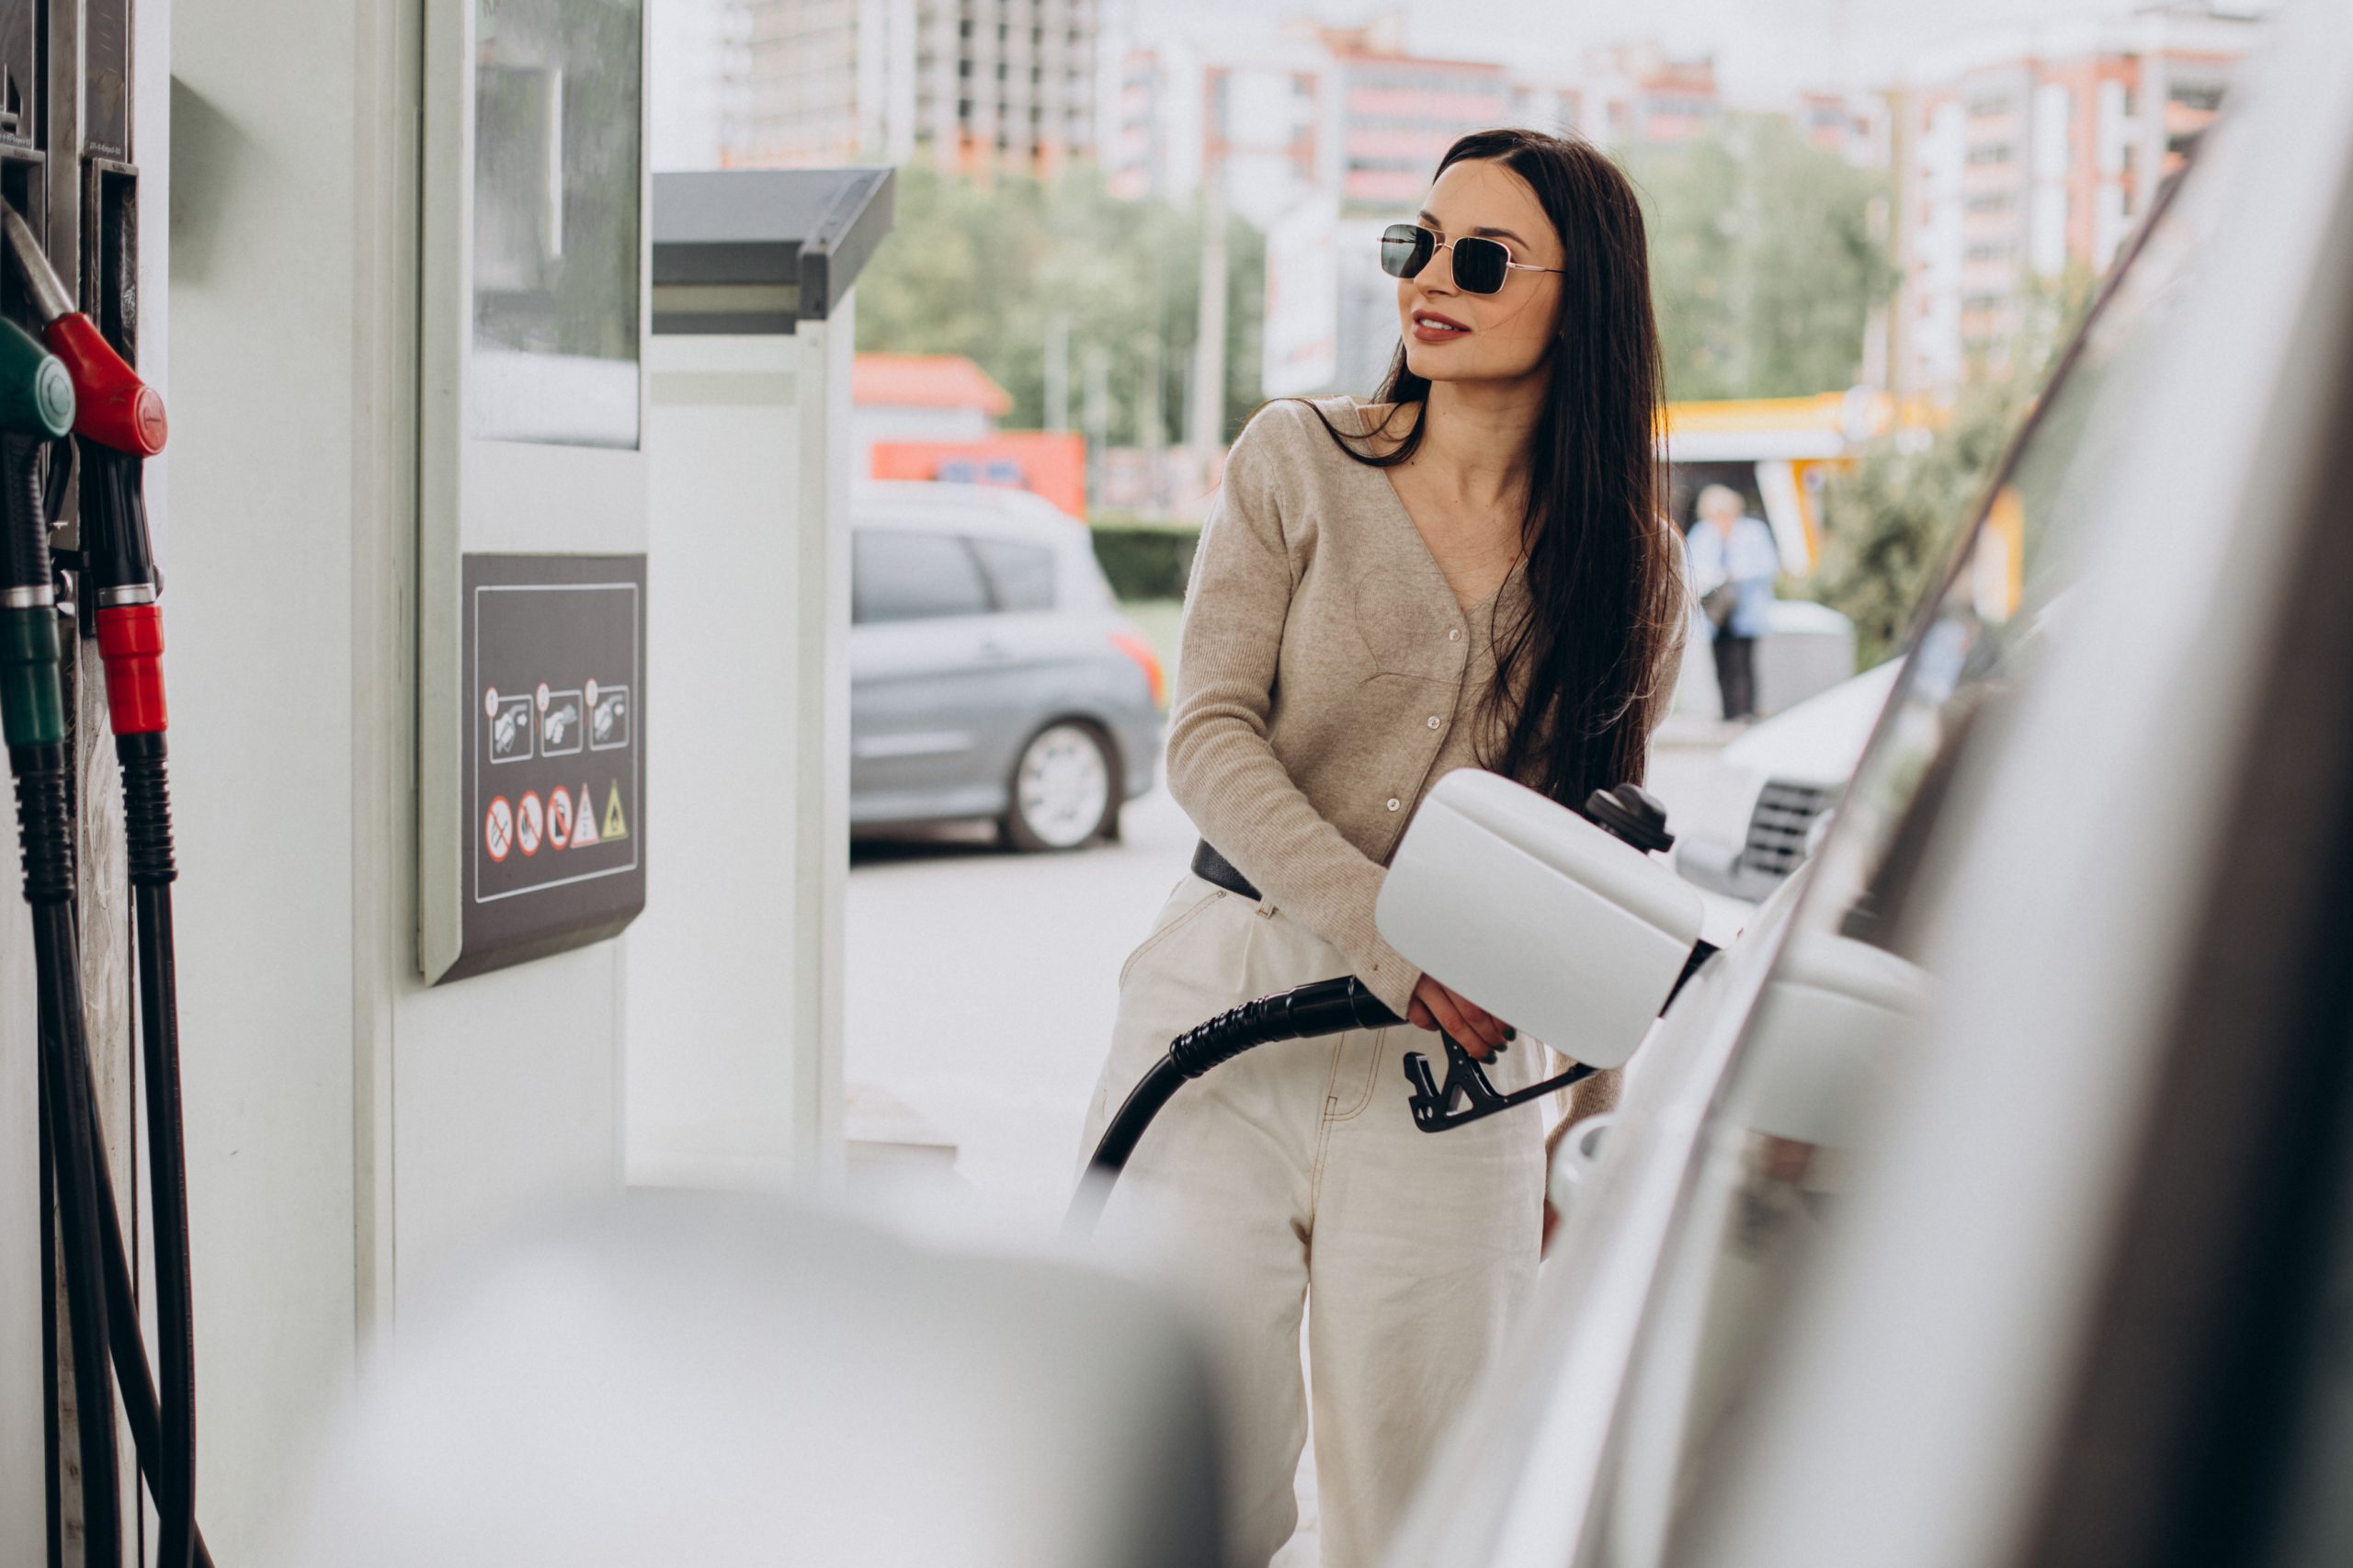 Confident female entrepreneur refuels her vehicle while seamlessly tracking her gas mileage with the user-friendly MileageWise app. She's maximizing efficiency, one fill-up at a time.